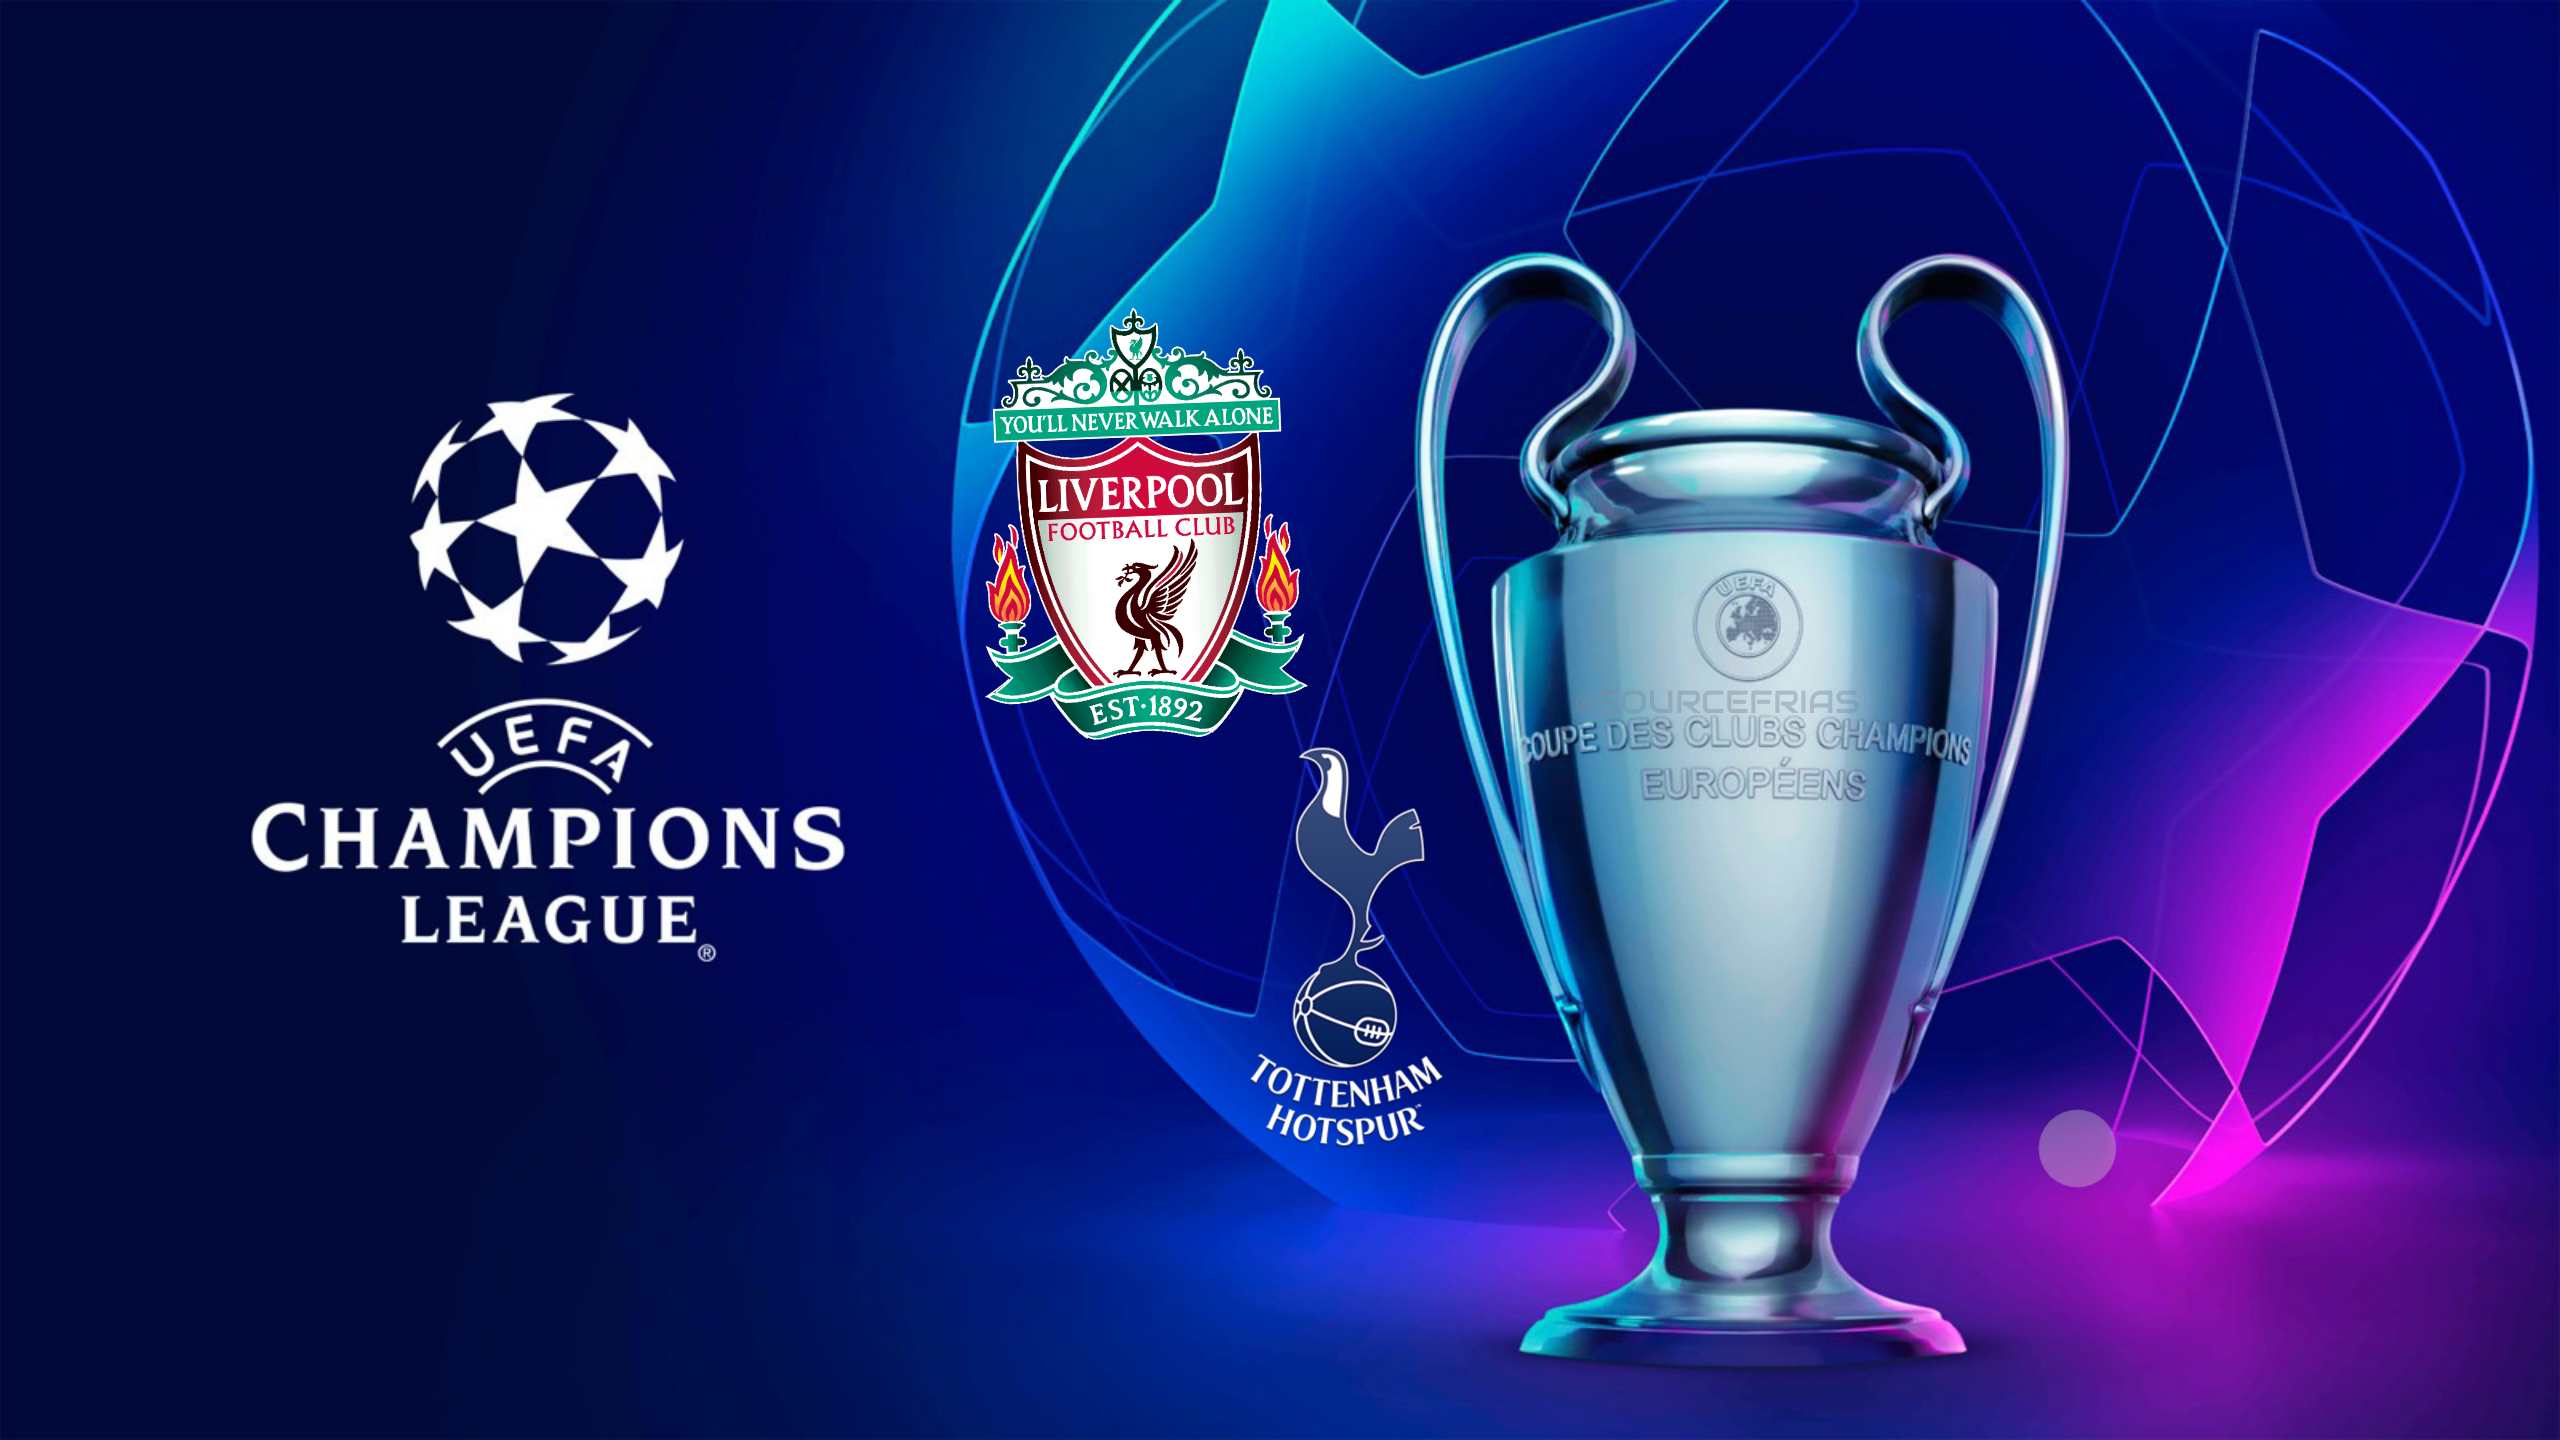 Liverpool Champions League Final Wallpaper On